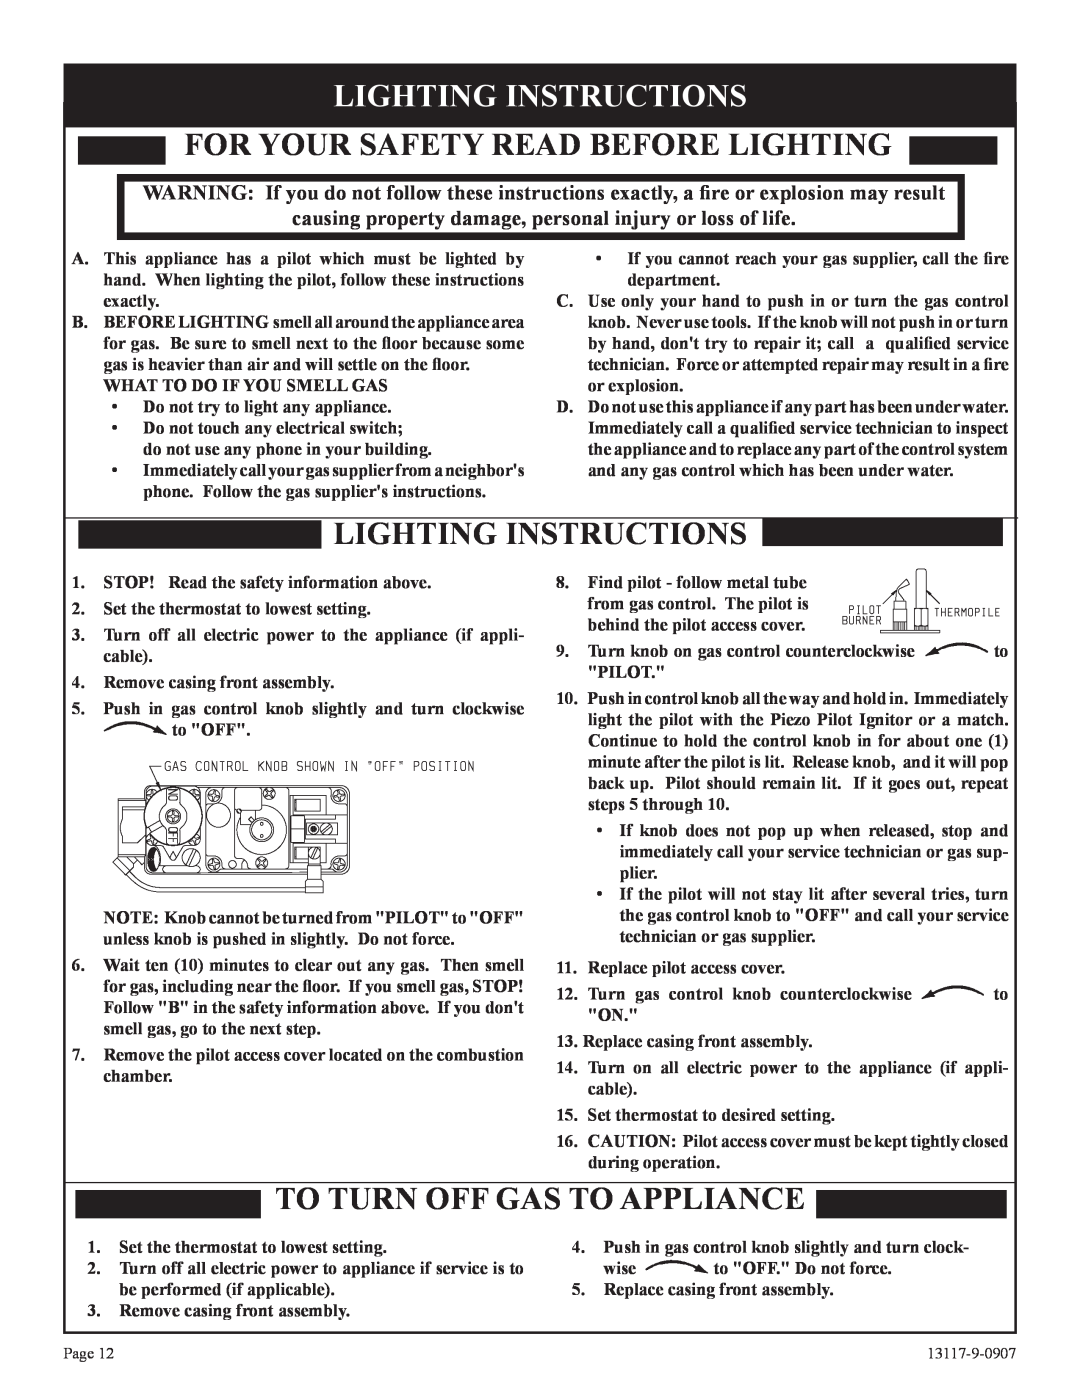 Empire Products DV-35T-1 Lighting Instructions, For Your Safety Read Before Lighting, To Turn Off Gas To Appliance 